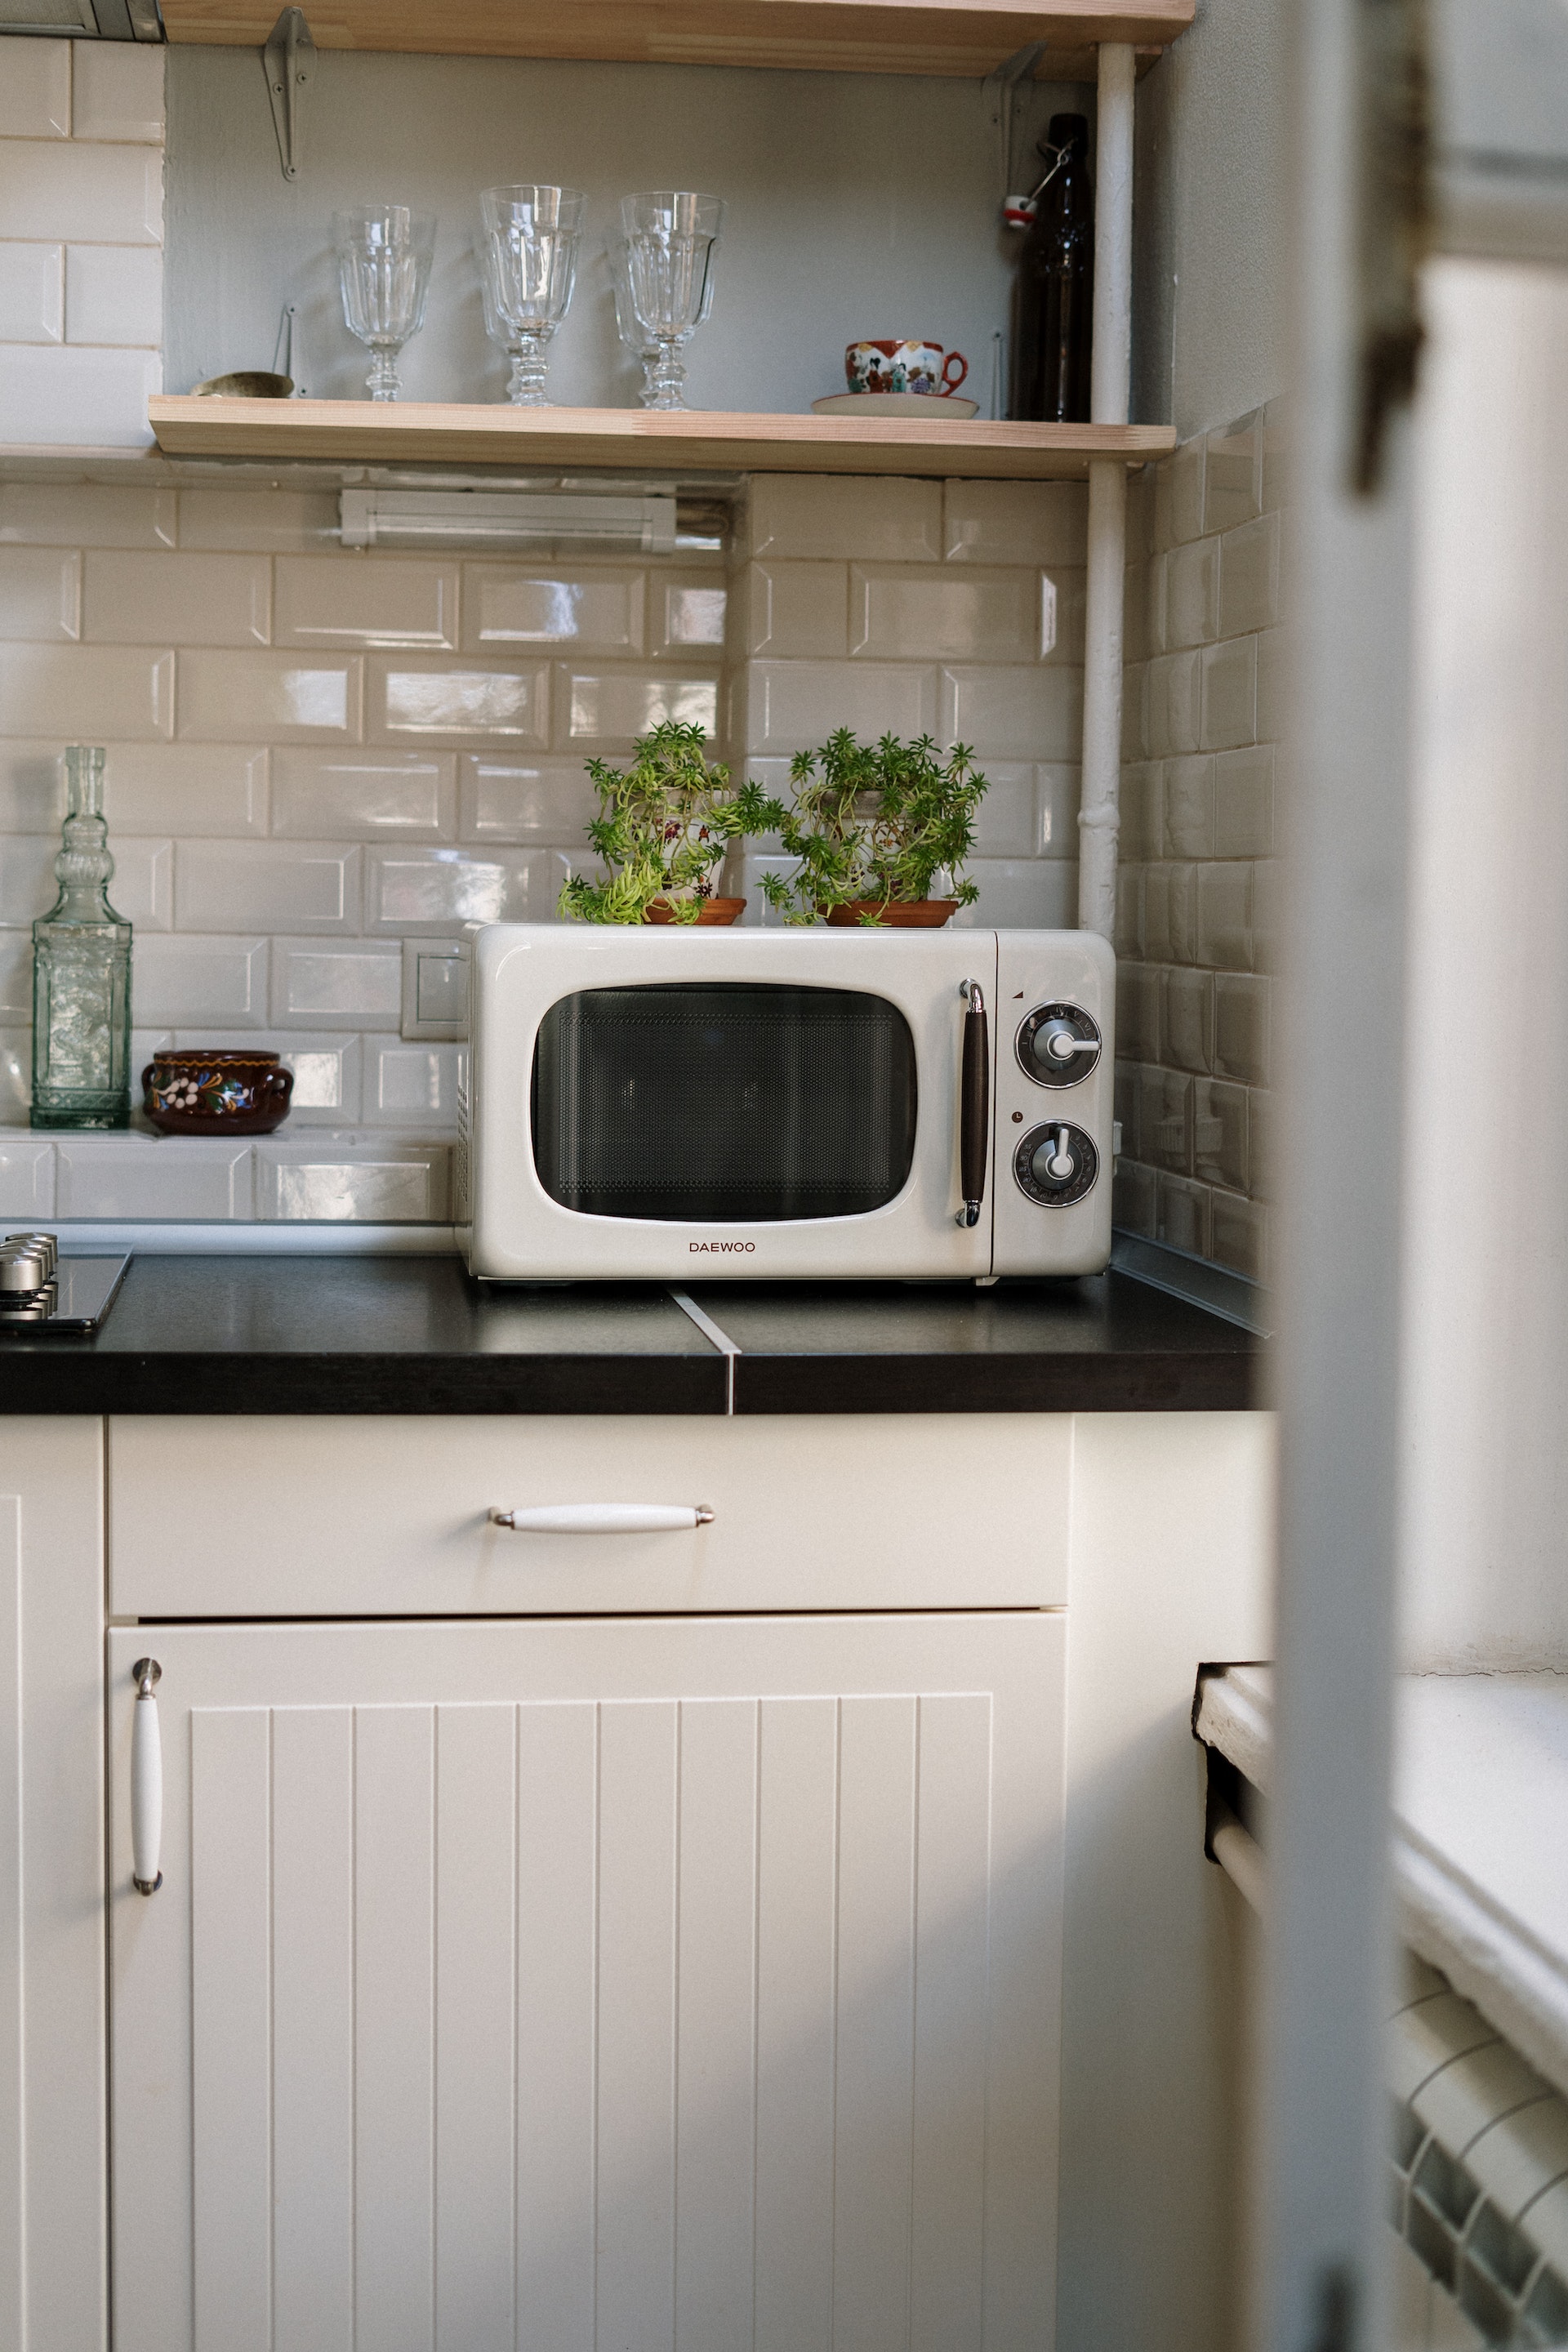 A microwave oven in a kitchen | Source: Pexels